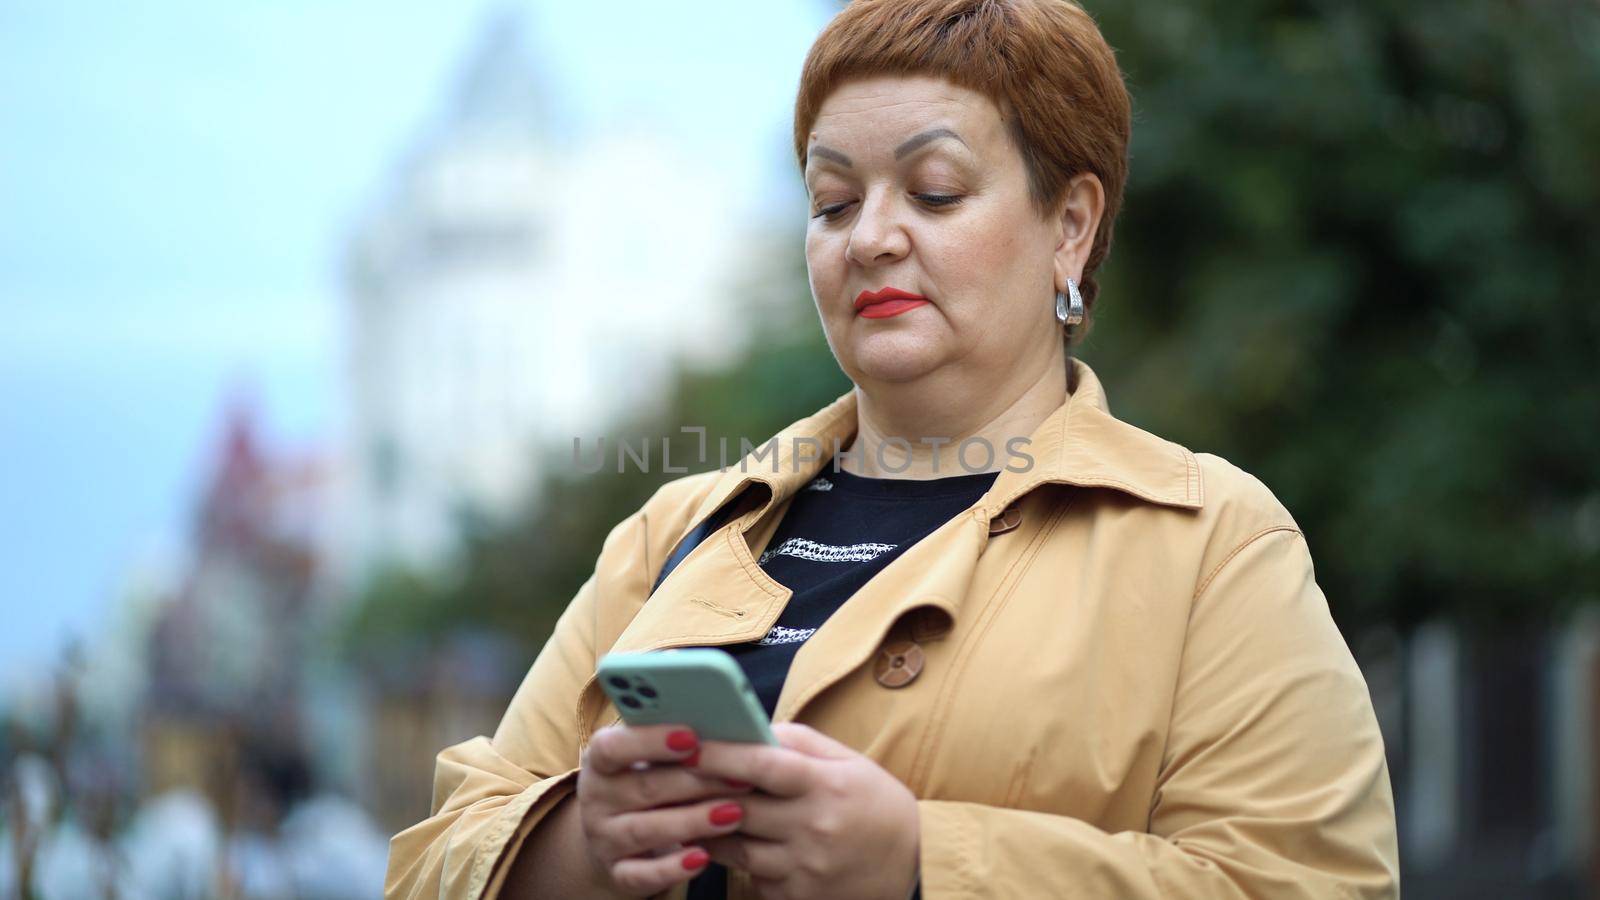 An elegant woman with short red hair and a raincoat is standing on the street and using a smartphone by Petrokill